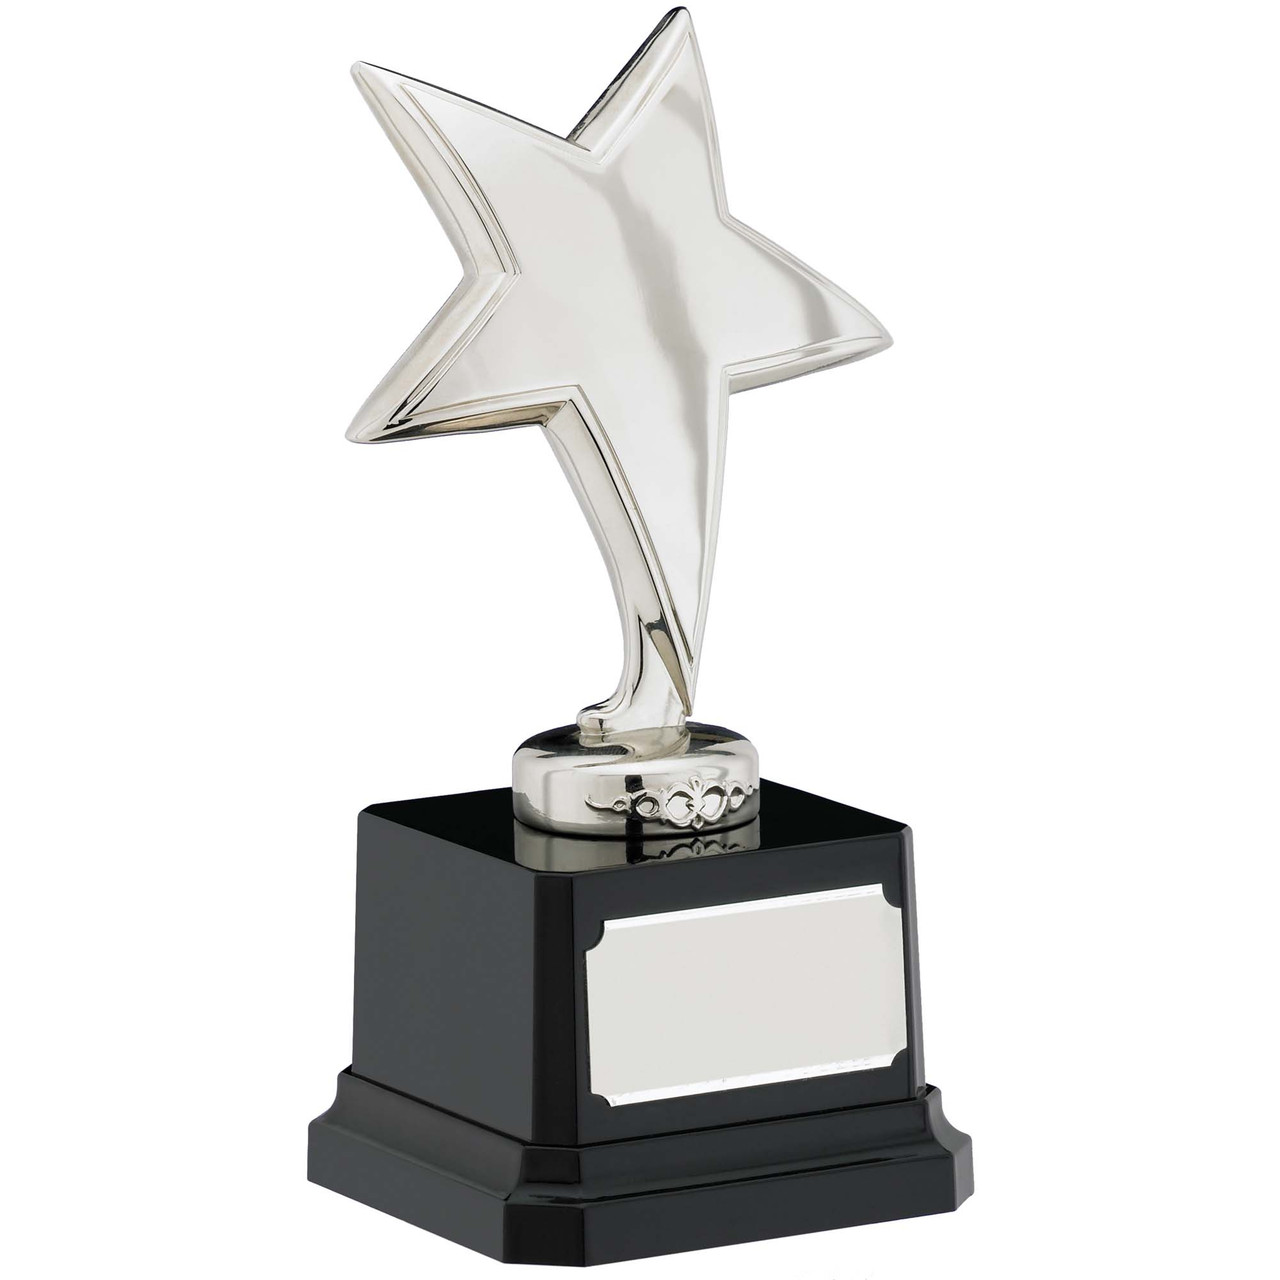 Silver finish achievement star award. Beautiful trophy with free engraving.